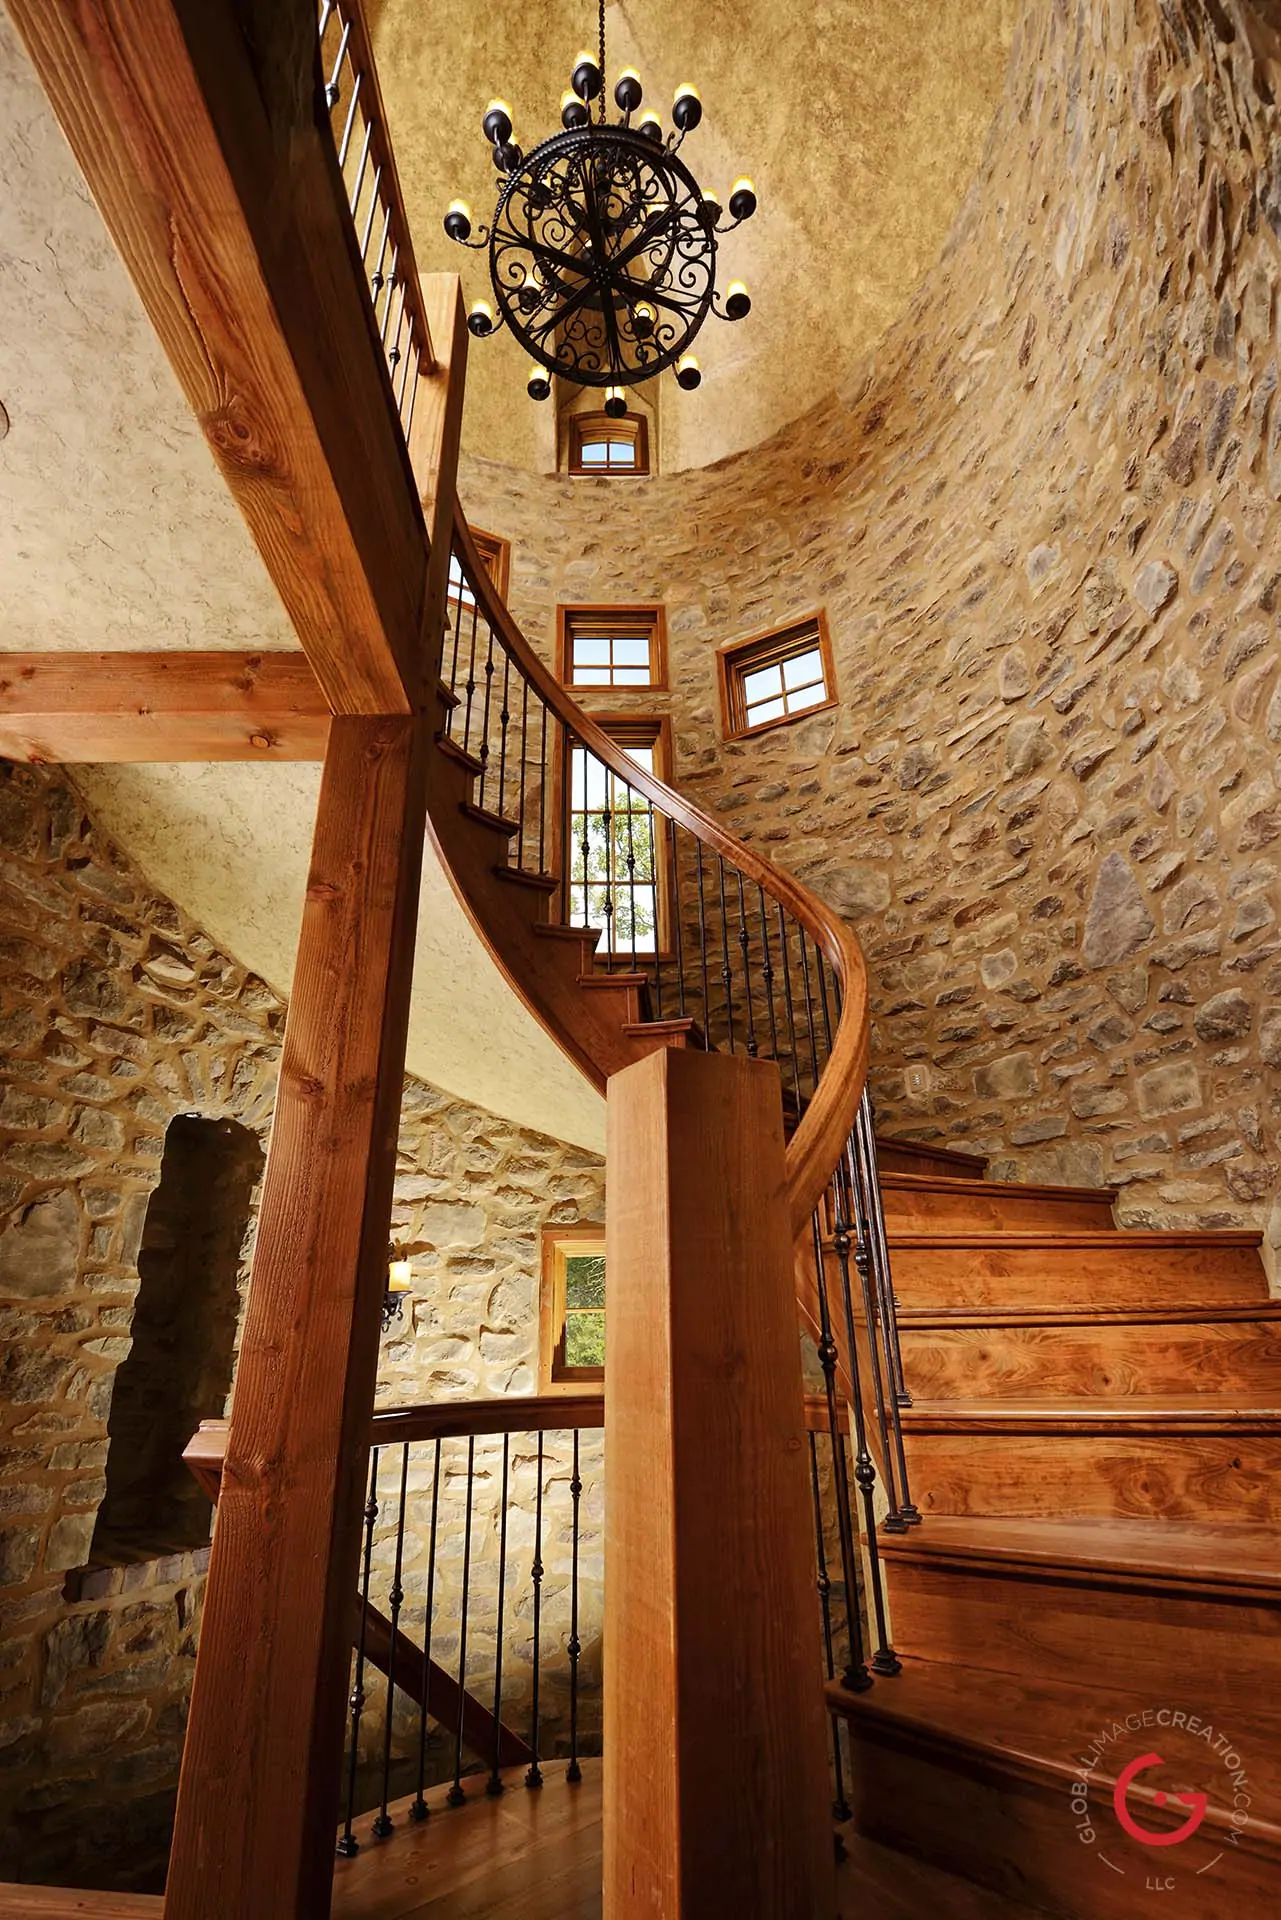 Ron Hill Castle Stairs, Home Interior Photographer - Room Photography